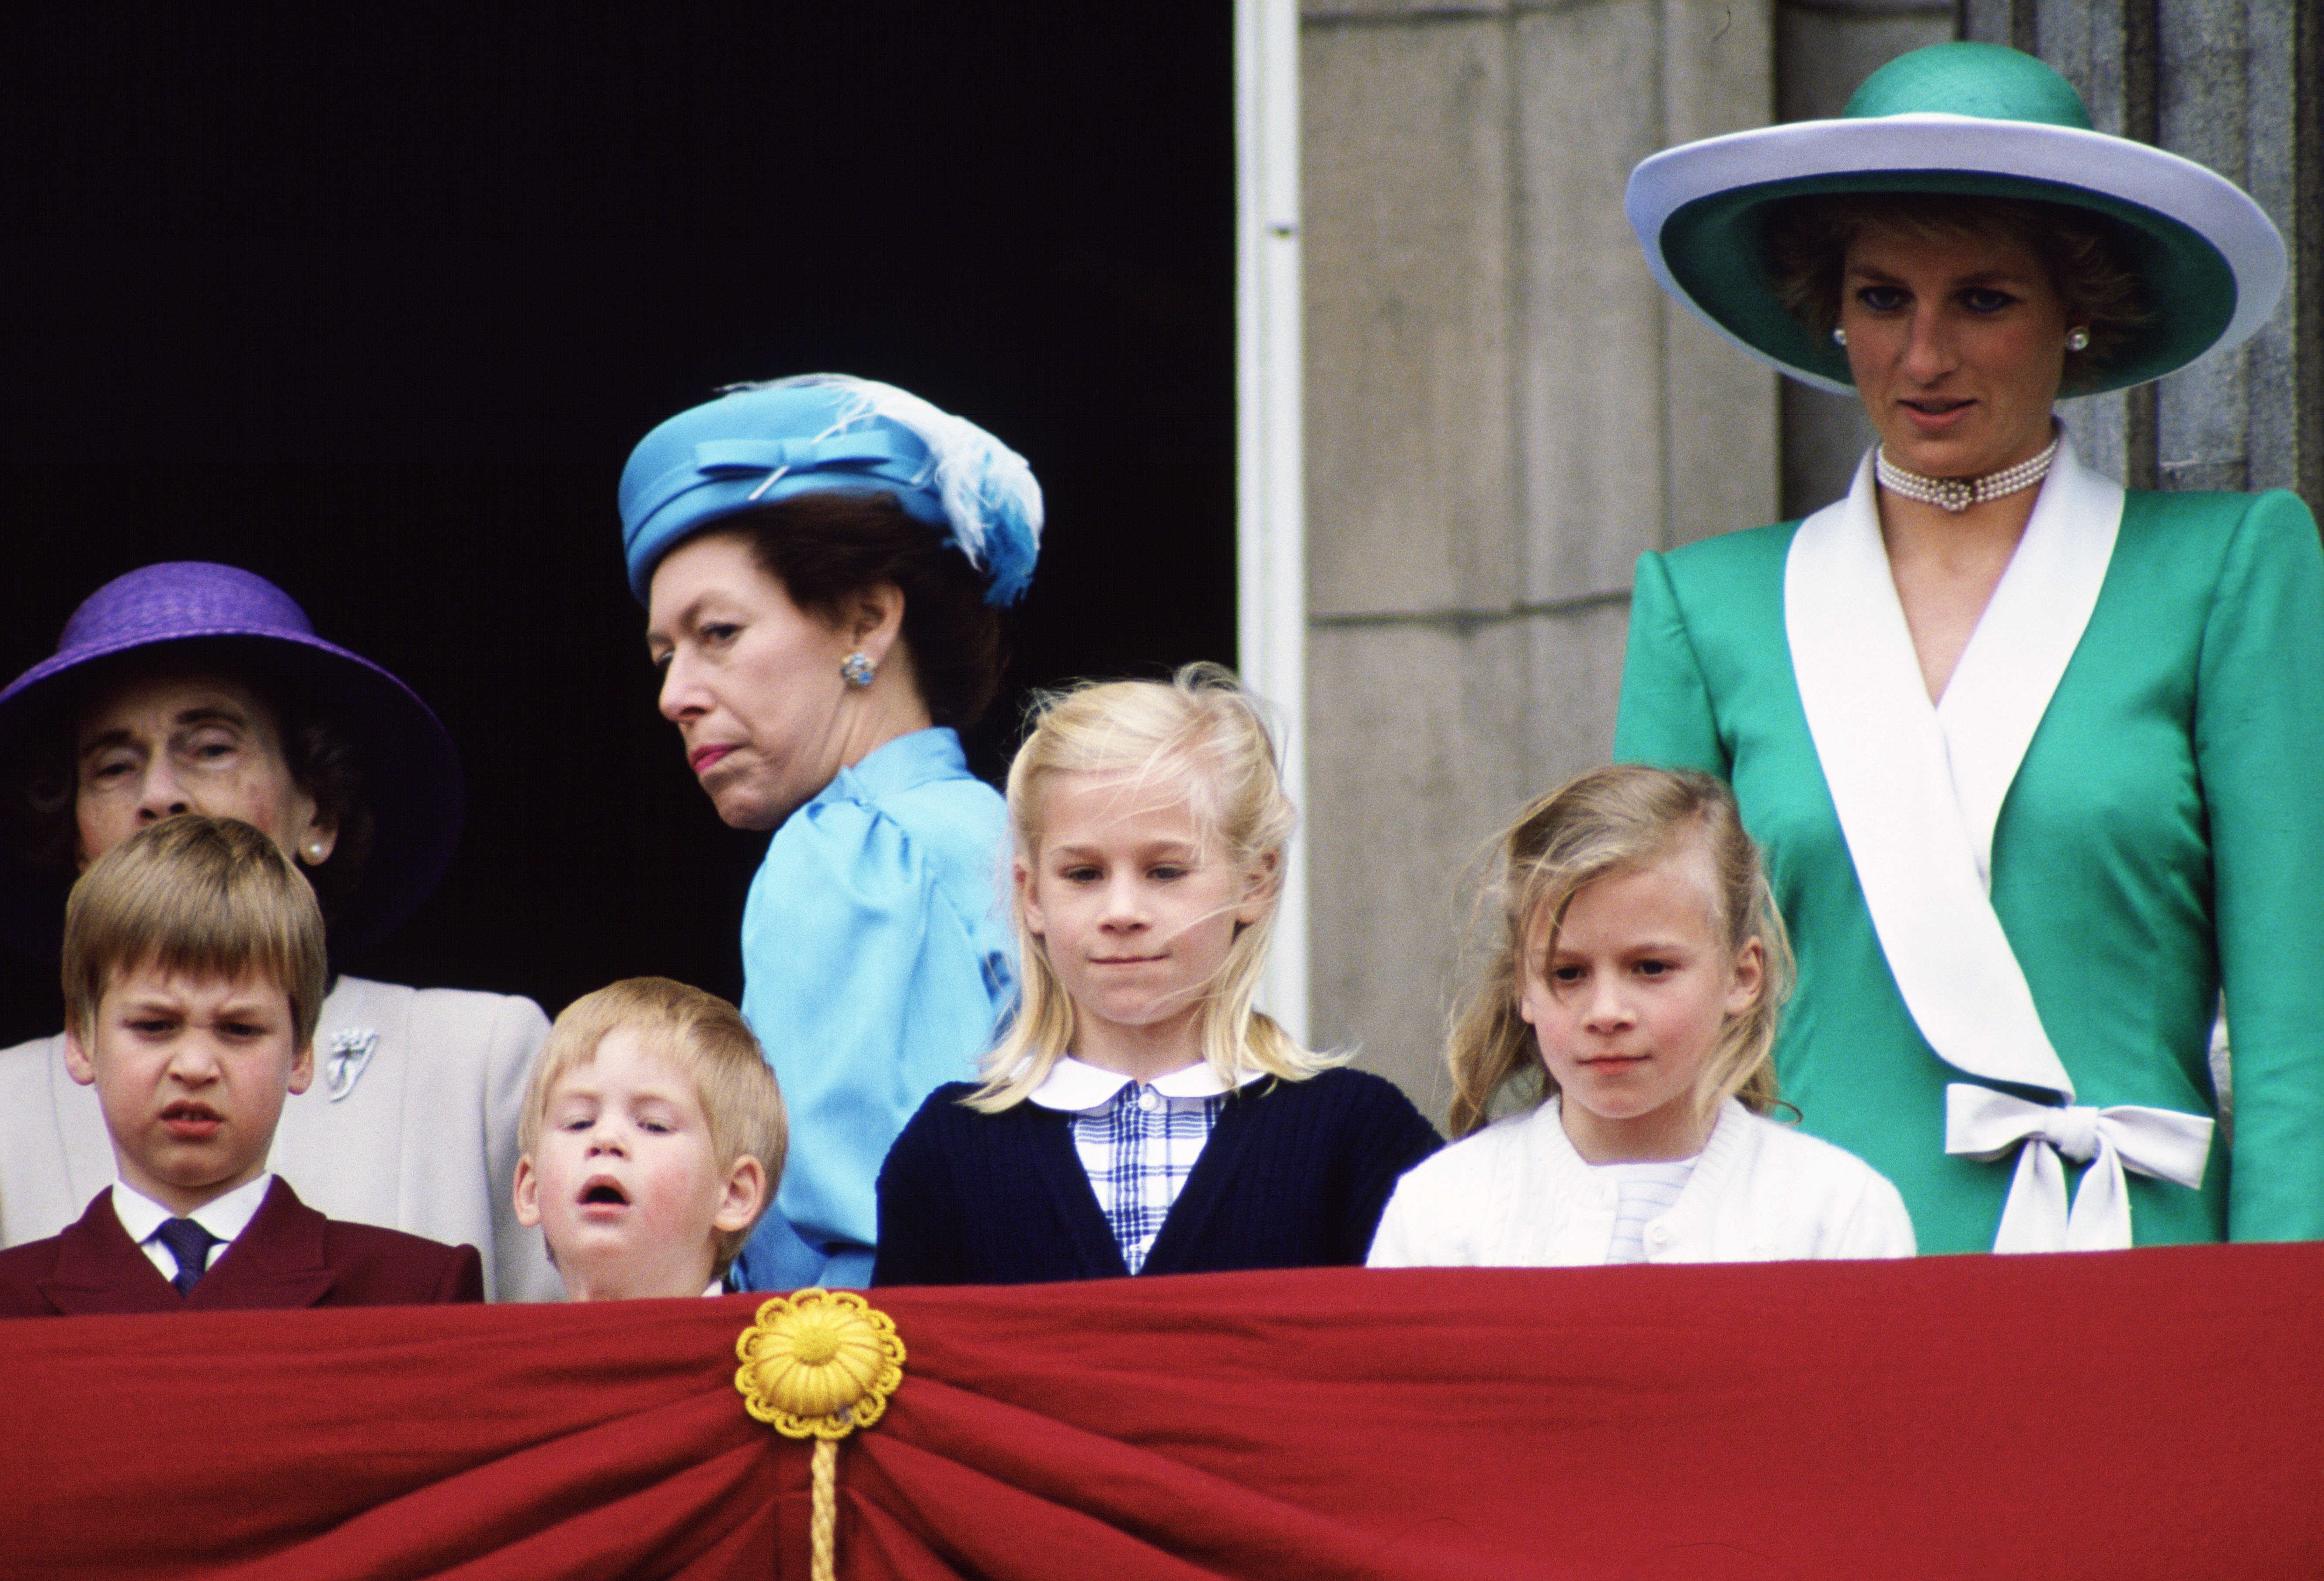 Diana, Princess of Wales, watches Trooping the Colour with Prince William, Prince Harry, Lady Rose Windsor, Lady Davina Windsor, and Princess Margaret from the balcony of Buckingham Palace | Photo: Getty Images